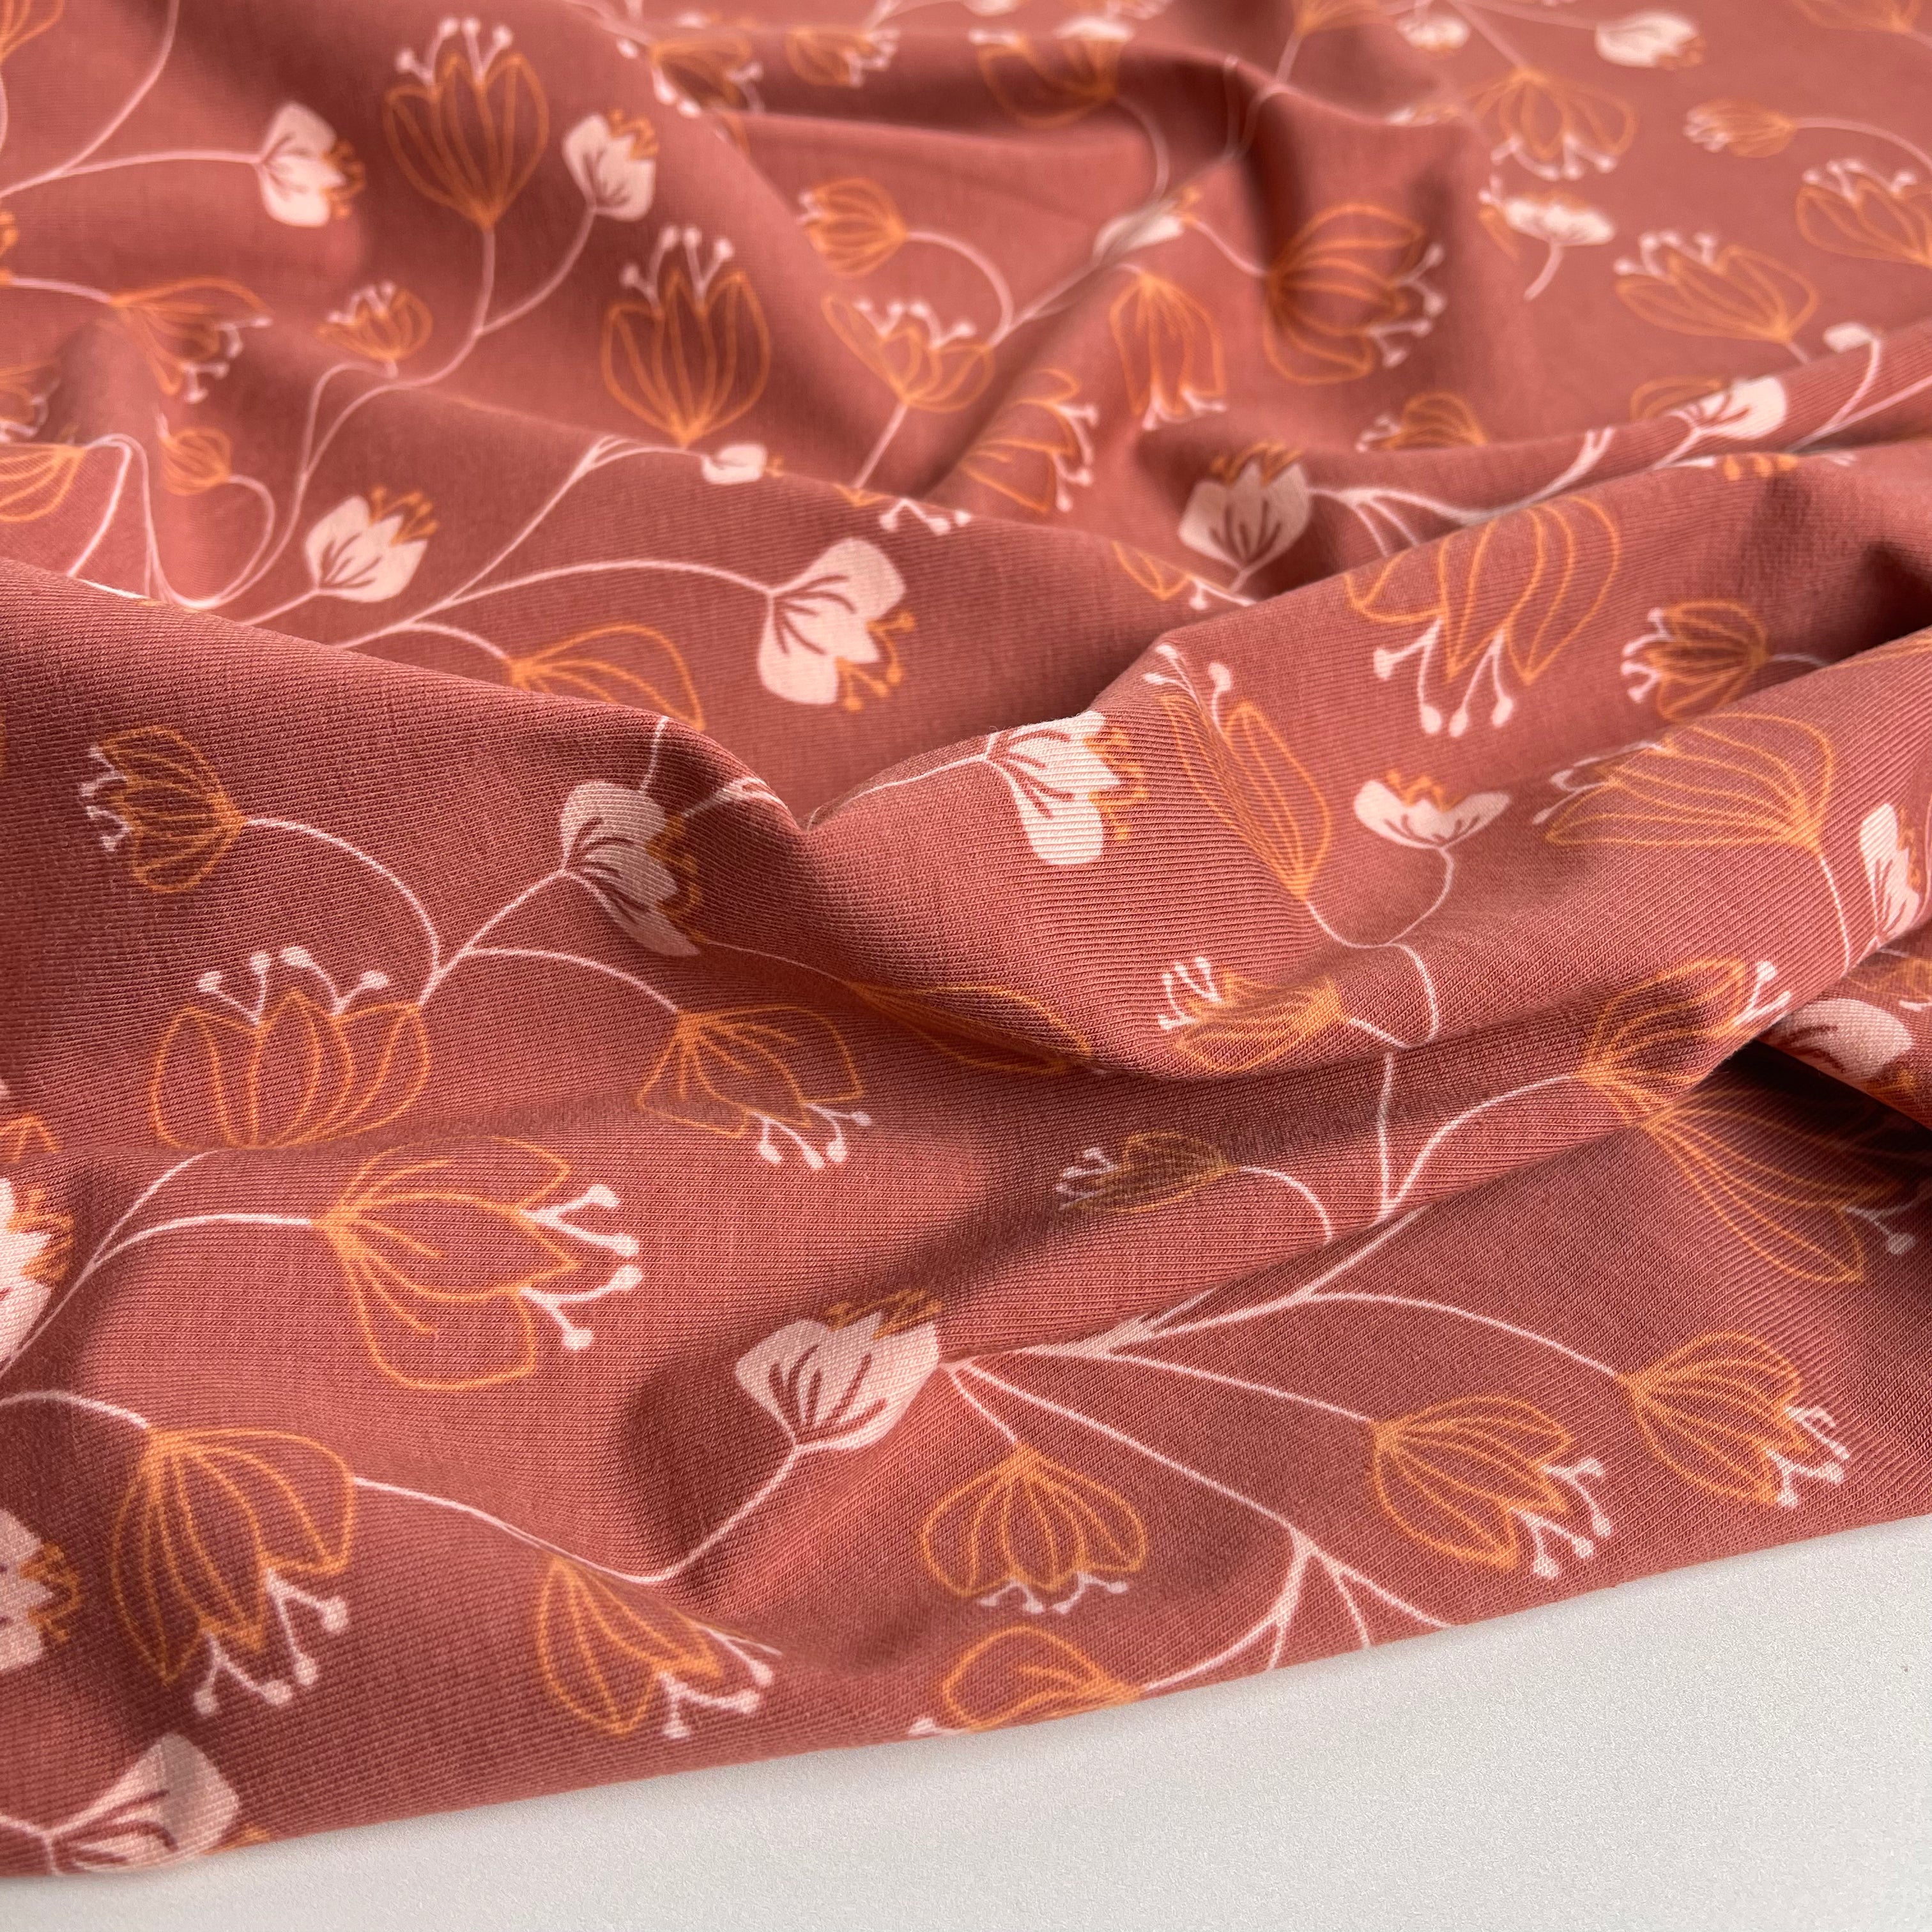 Floral Lines in Cinnamon Cotton Jersey Fabric